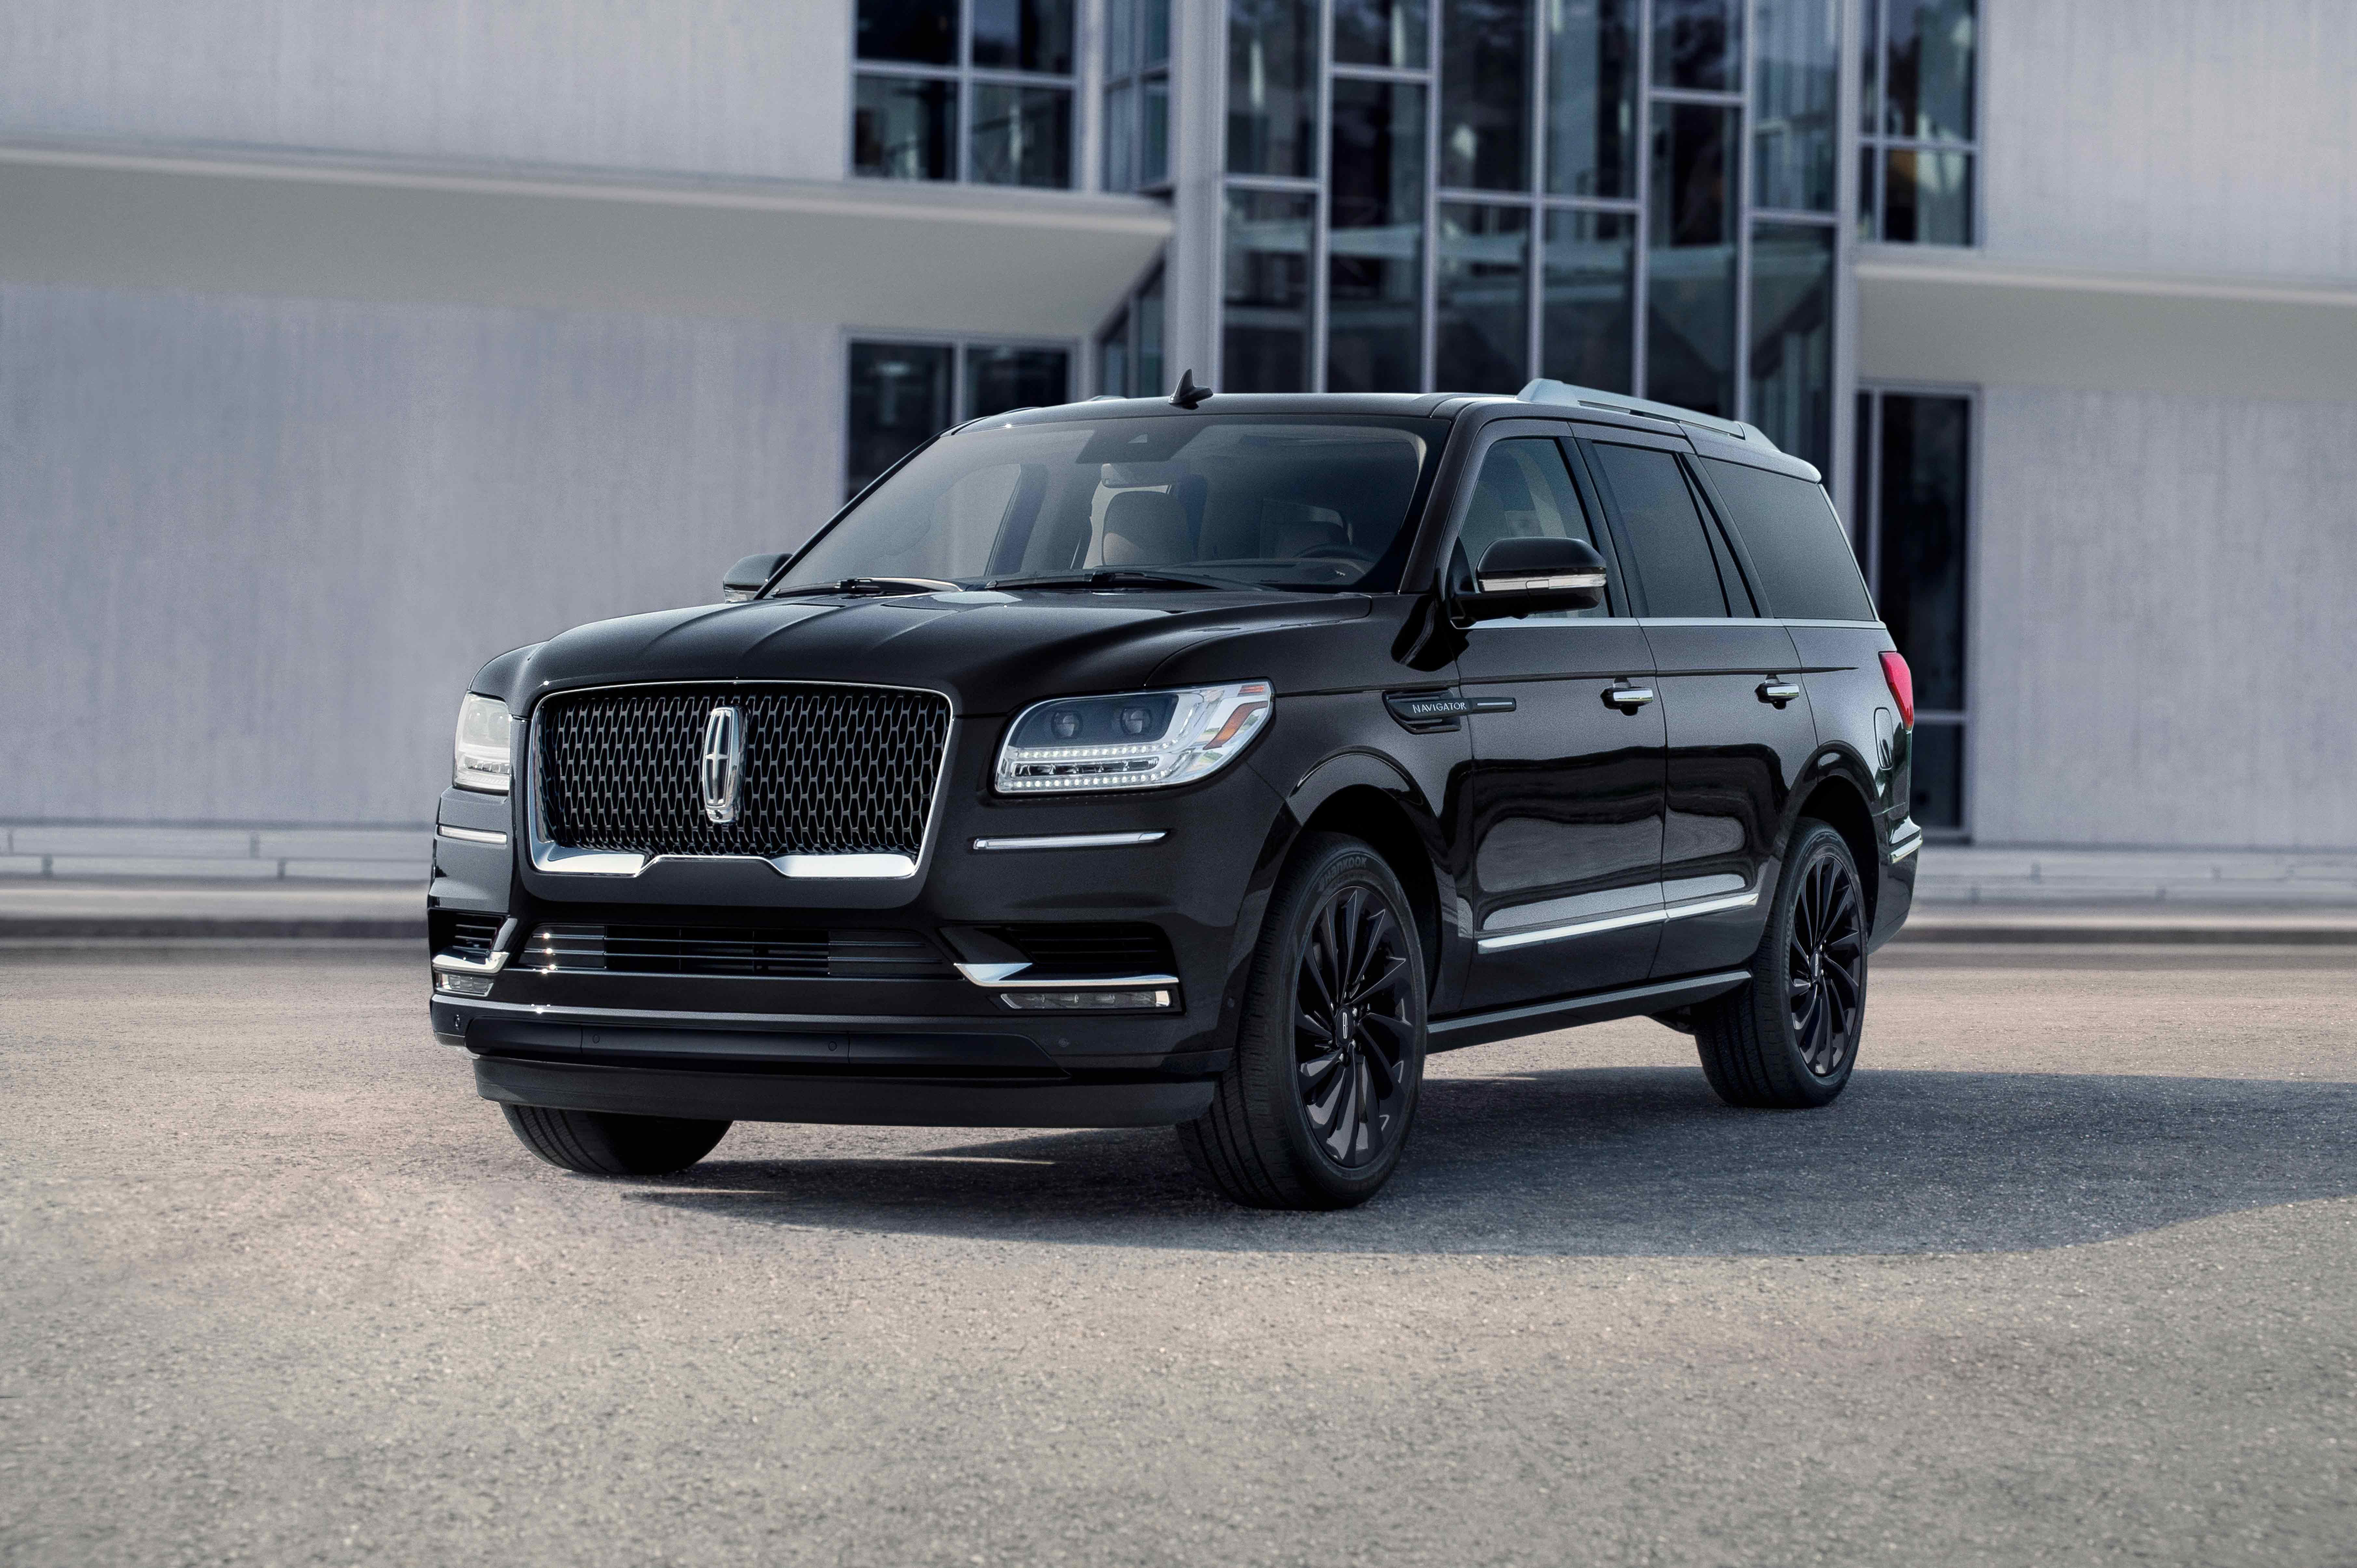 Lincoln Introduces Monochromatic Package for Nautilus and Aviator, Joining the Striking One-Tone Navigator